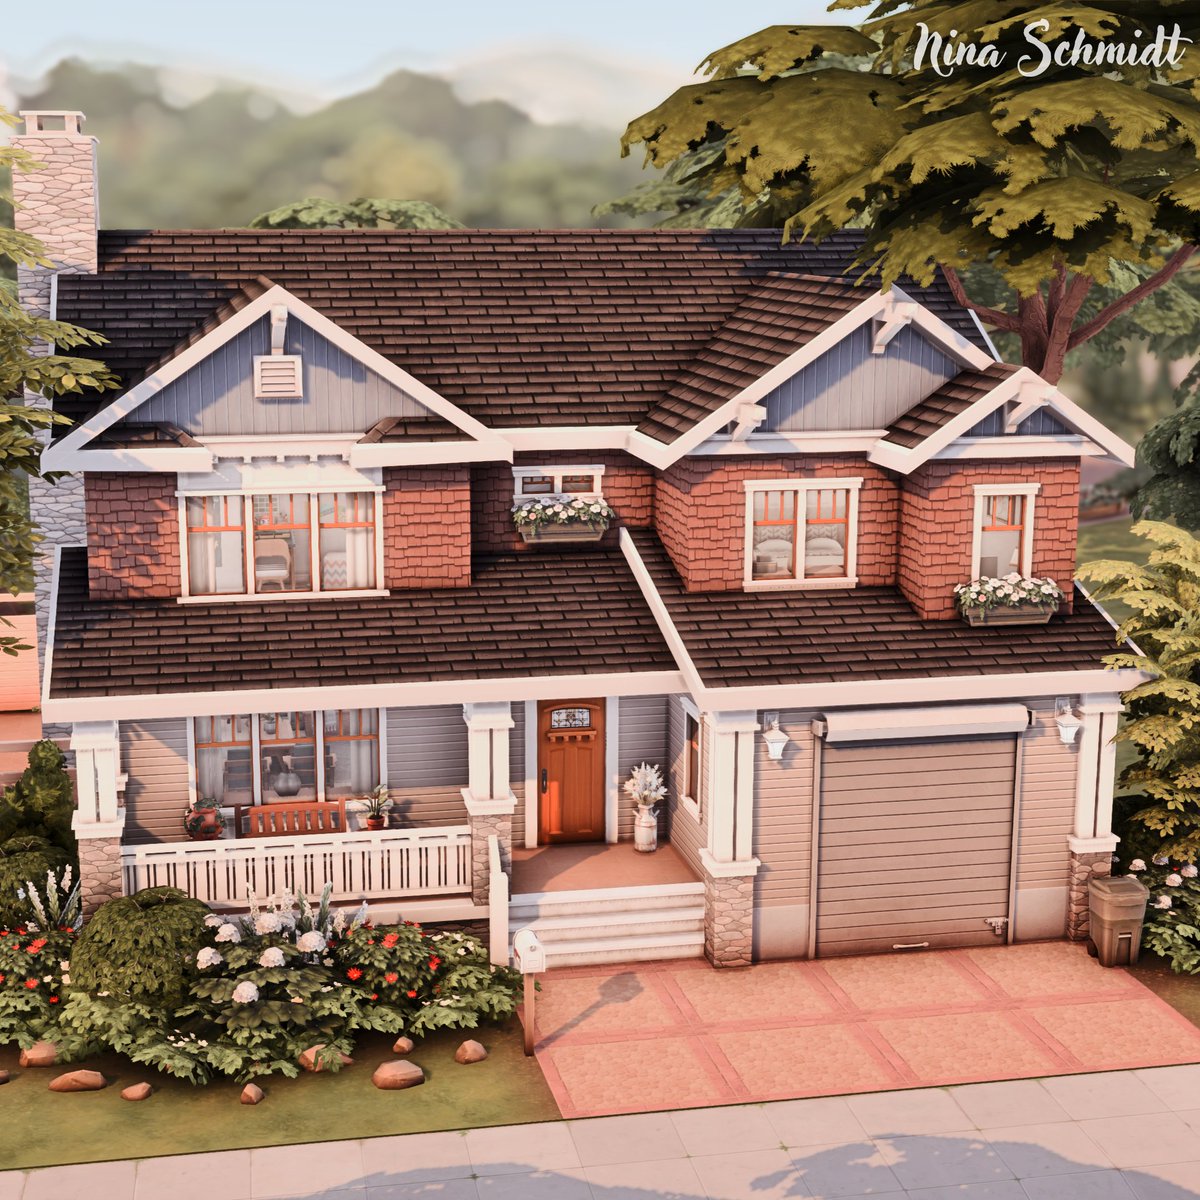 SEQUOIA FAMILY HOUSE 🏡 youtu.be/9BM_CS56Cjs #TheSims #TheSims4 #ShowUsYourBuilds